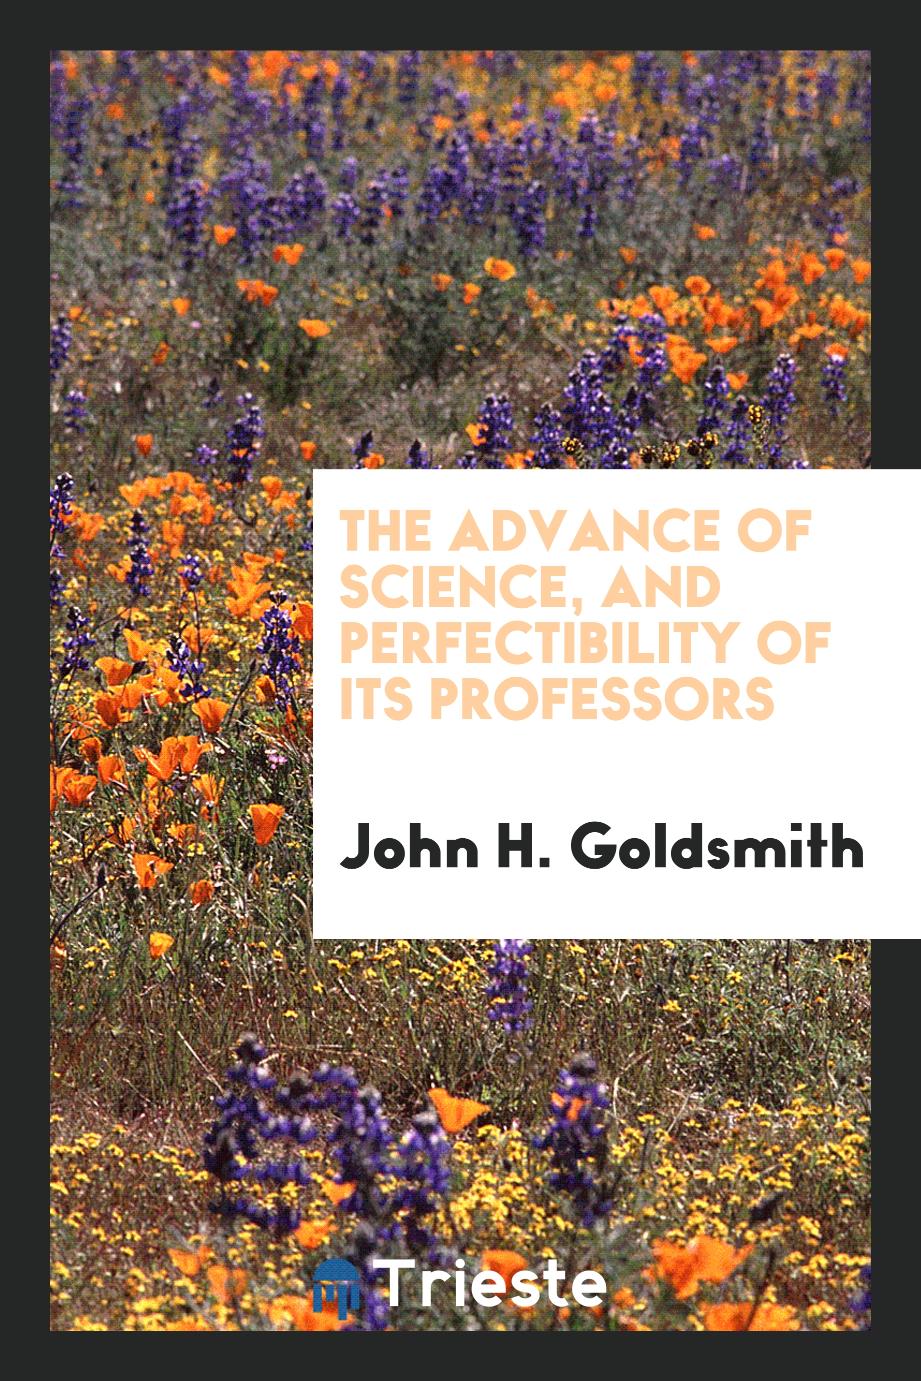 The advance of science, and perfectibility of its professors